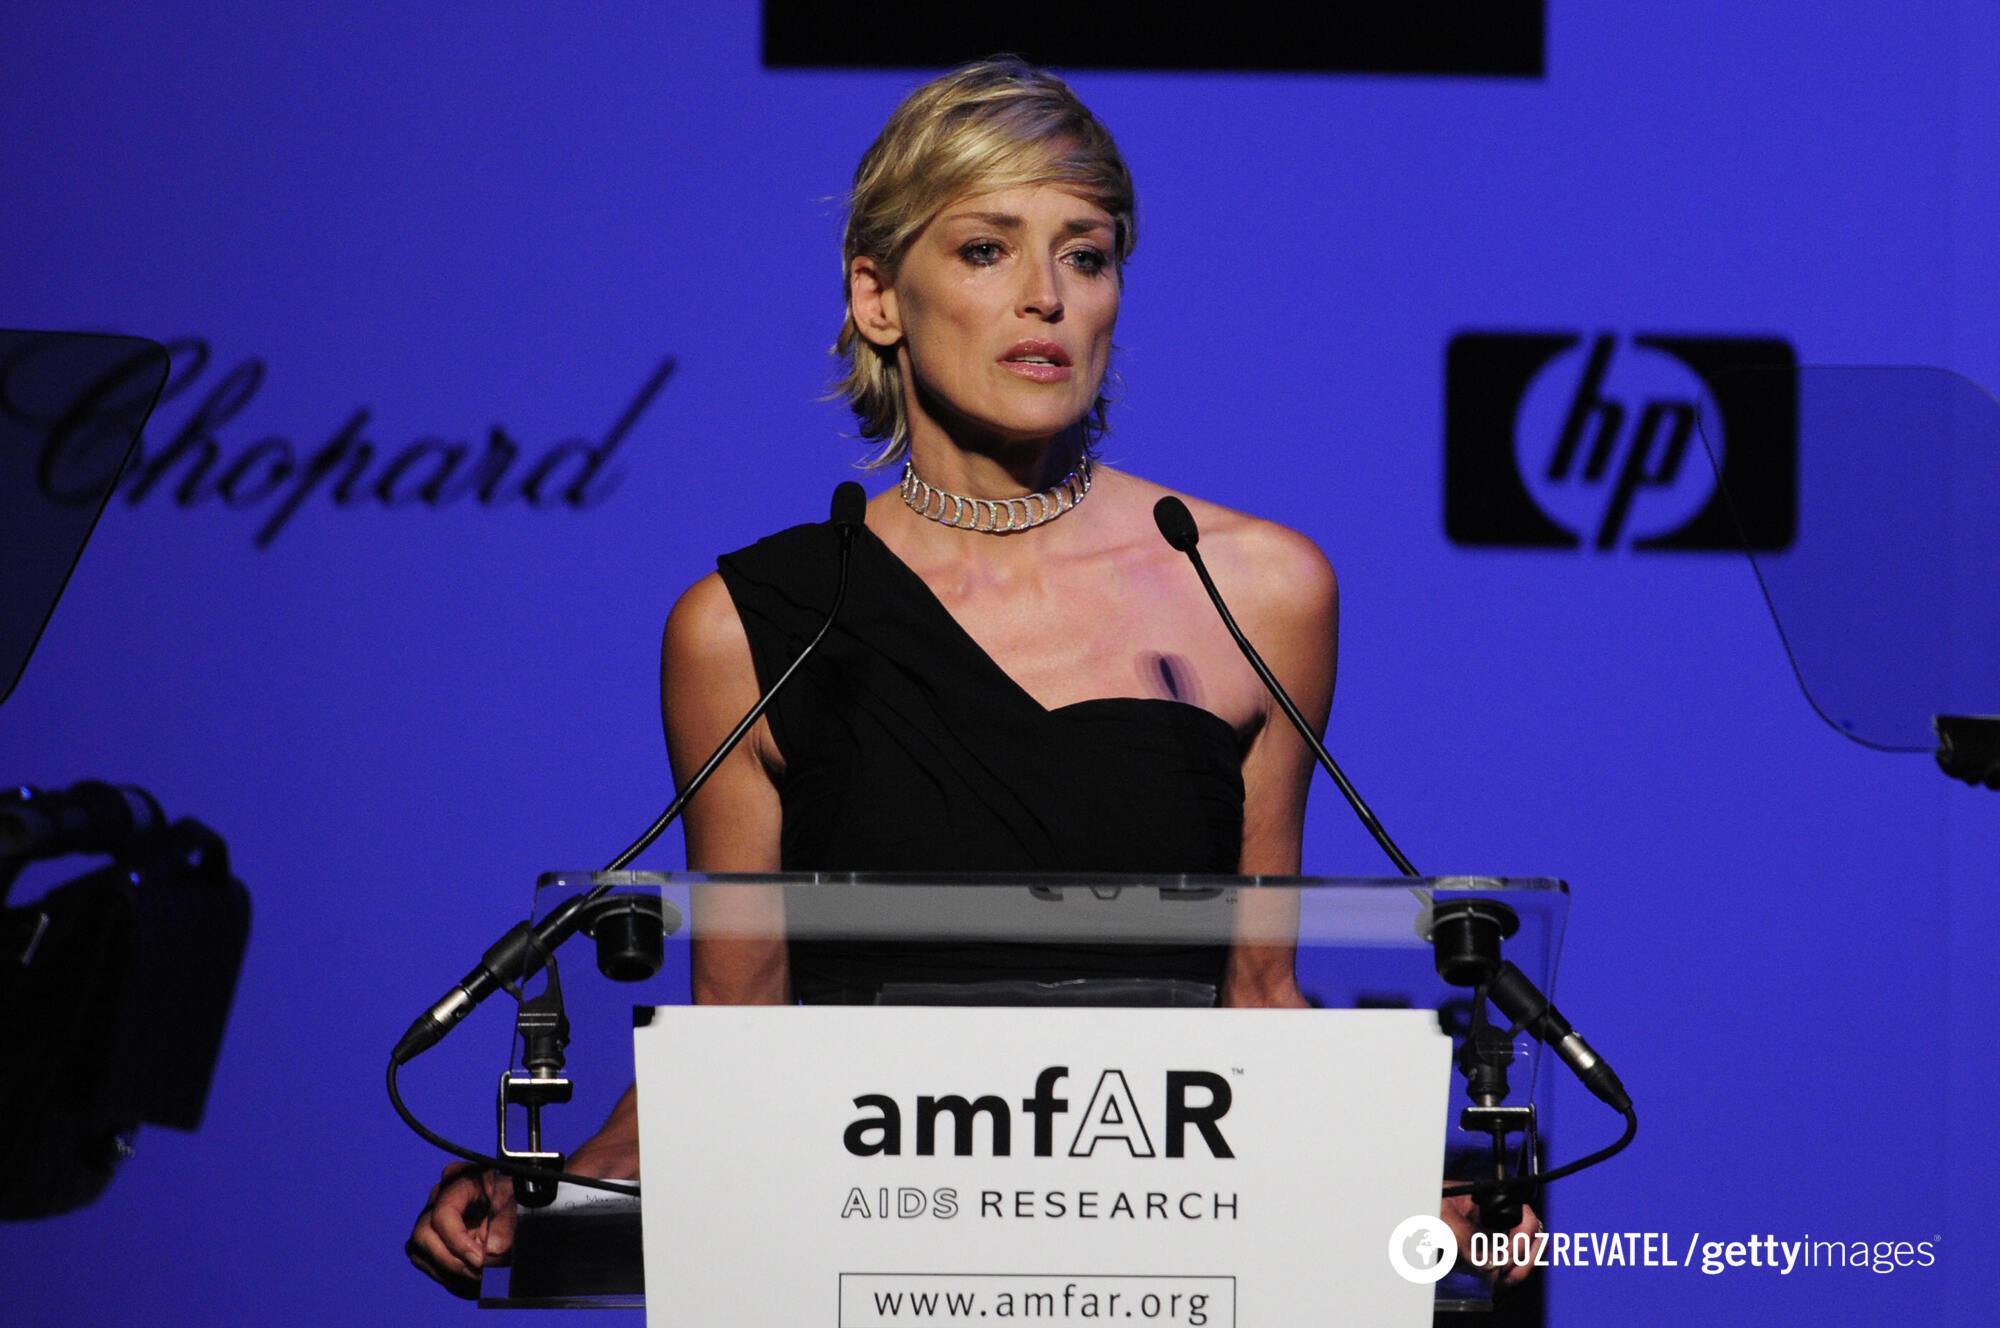 Sharon Stone has candidly revealed how she lost movie roles due to memory problems after suffering a stroke